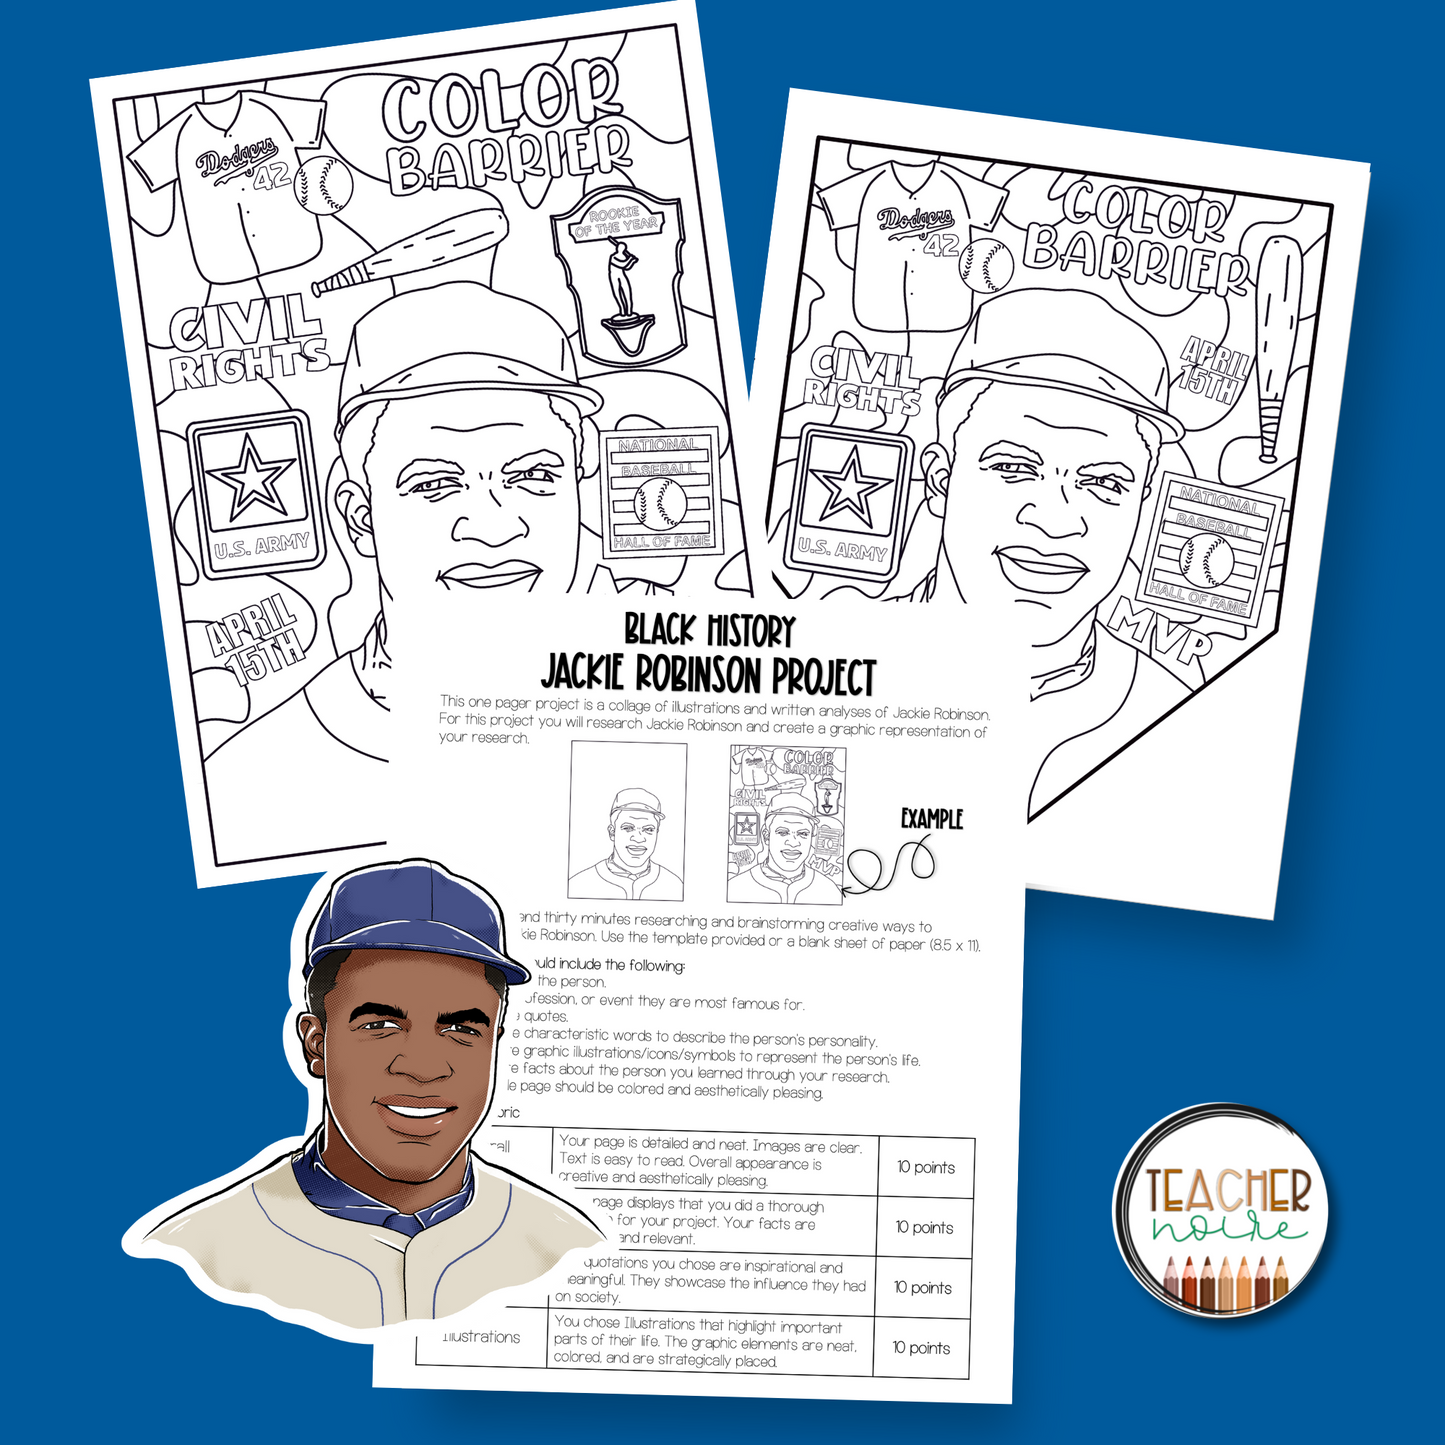 Jackie Robinson Biography Project [FREE]